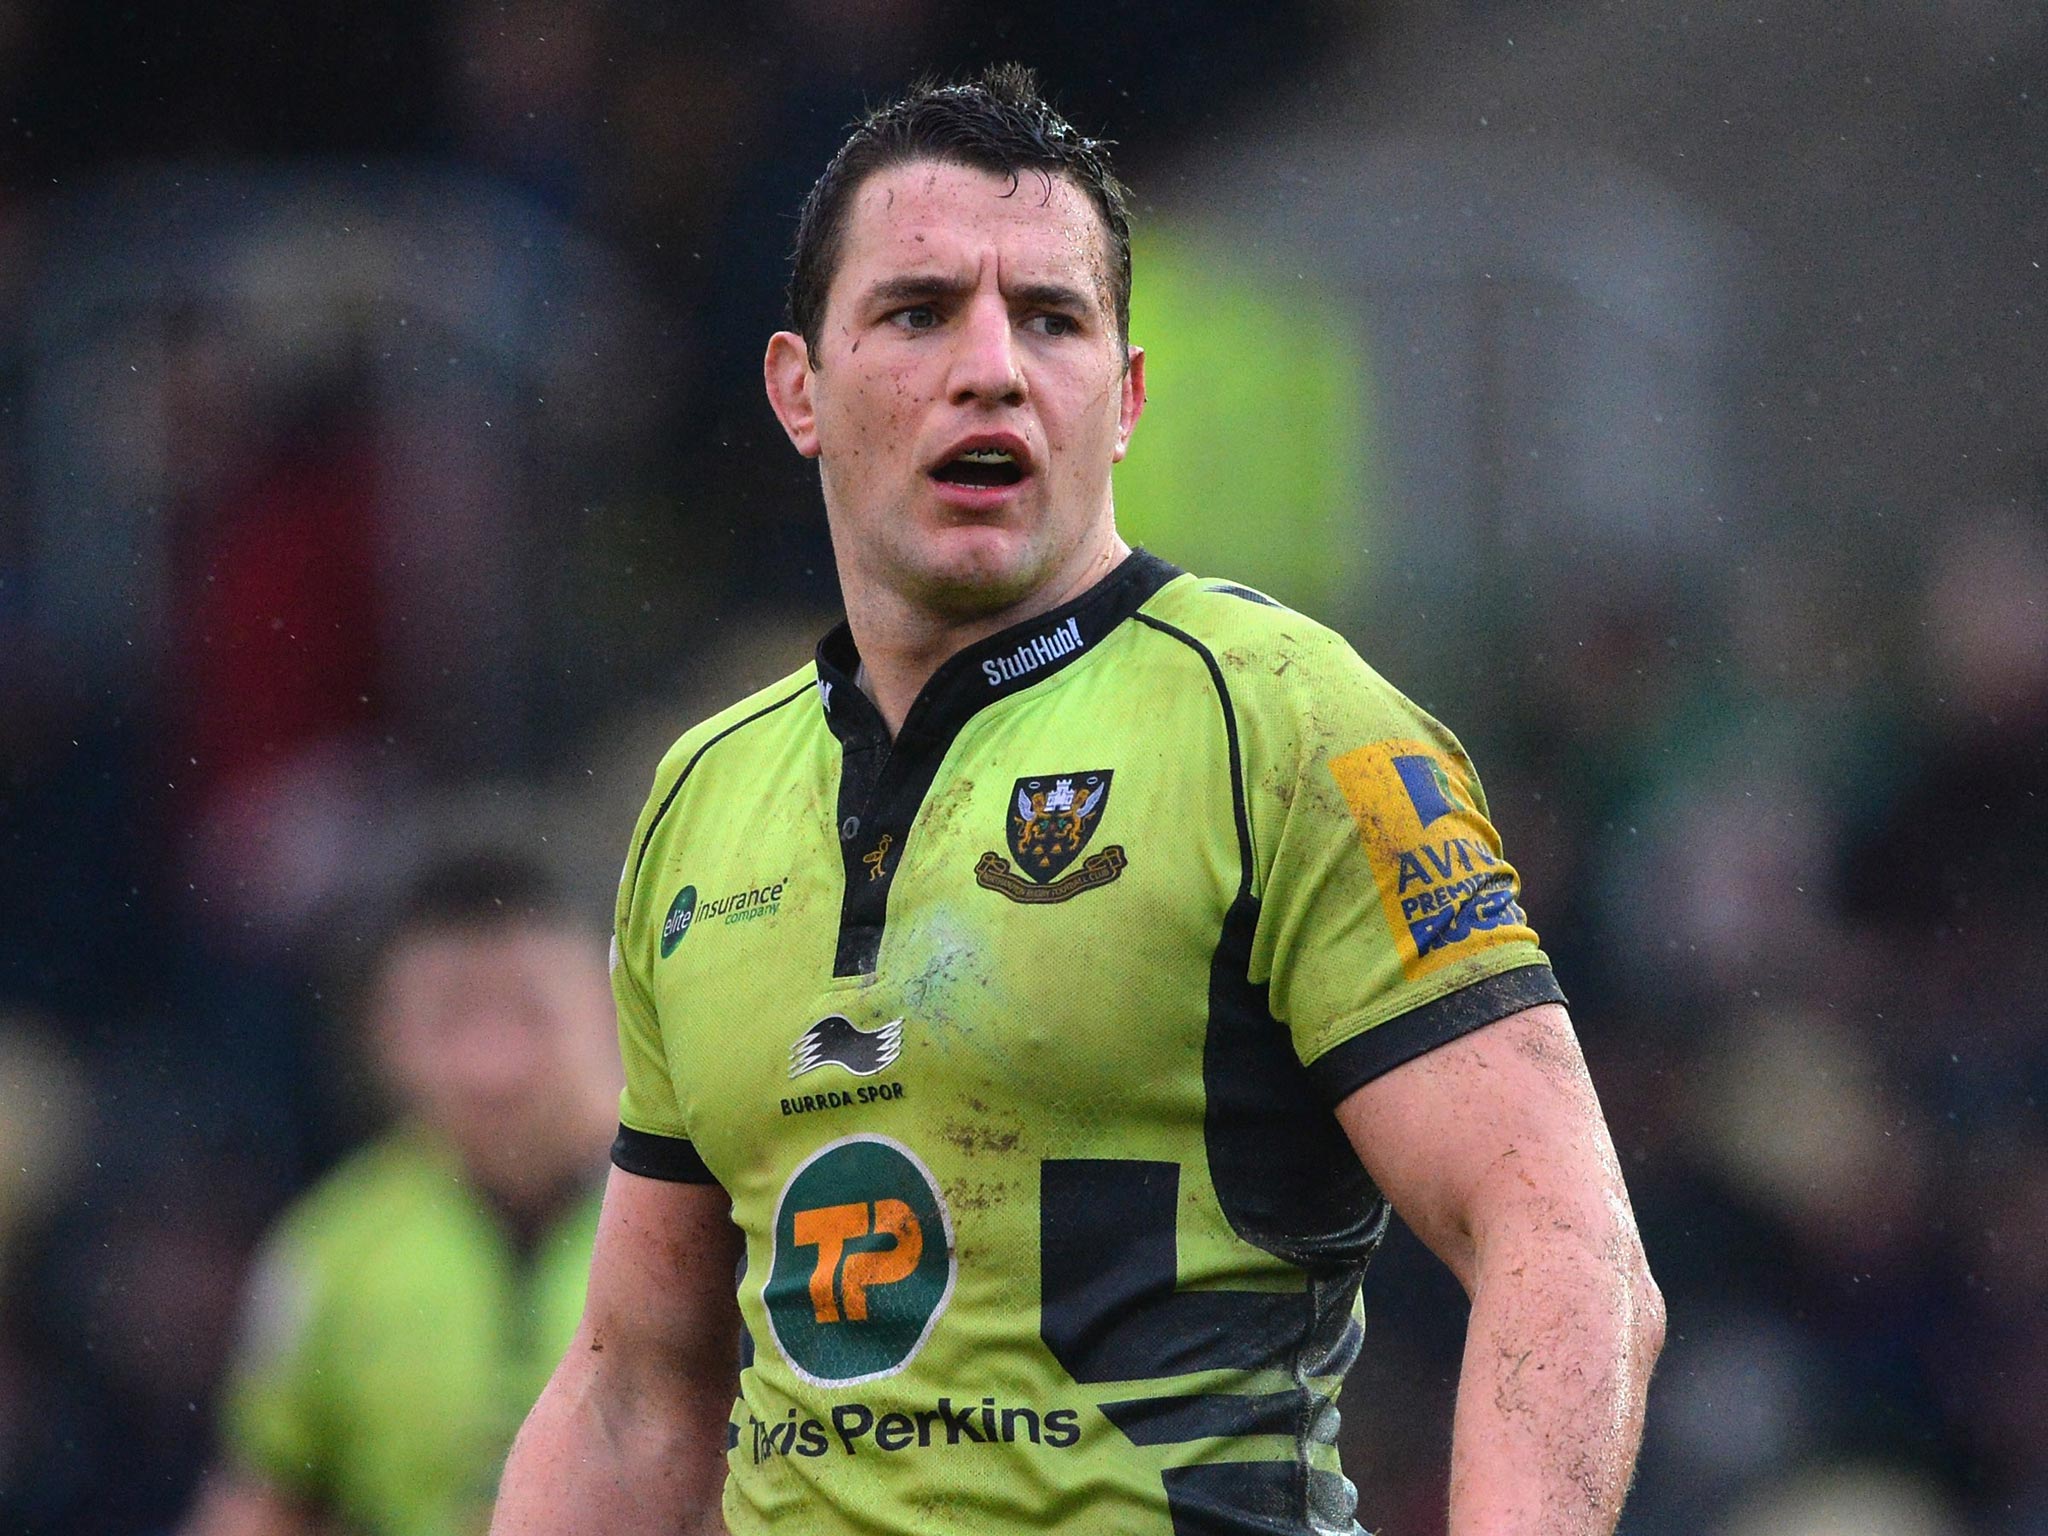 Phil Dowson will lead Northampton against Gloucester today in his 200th Premiership appearance